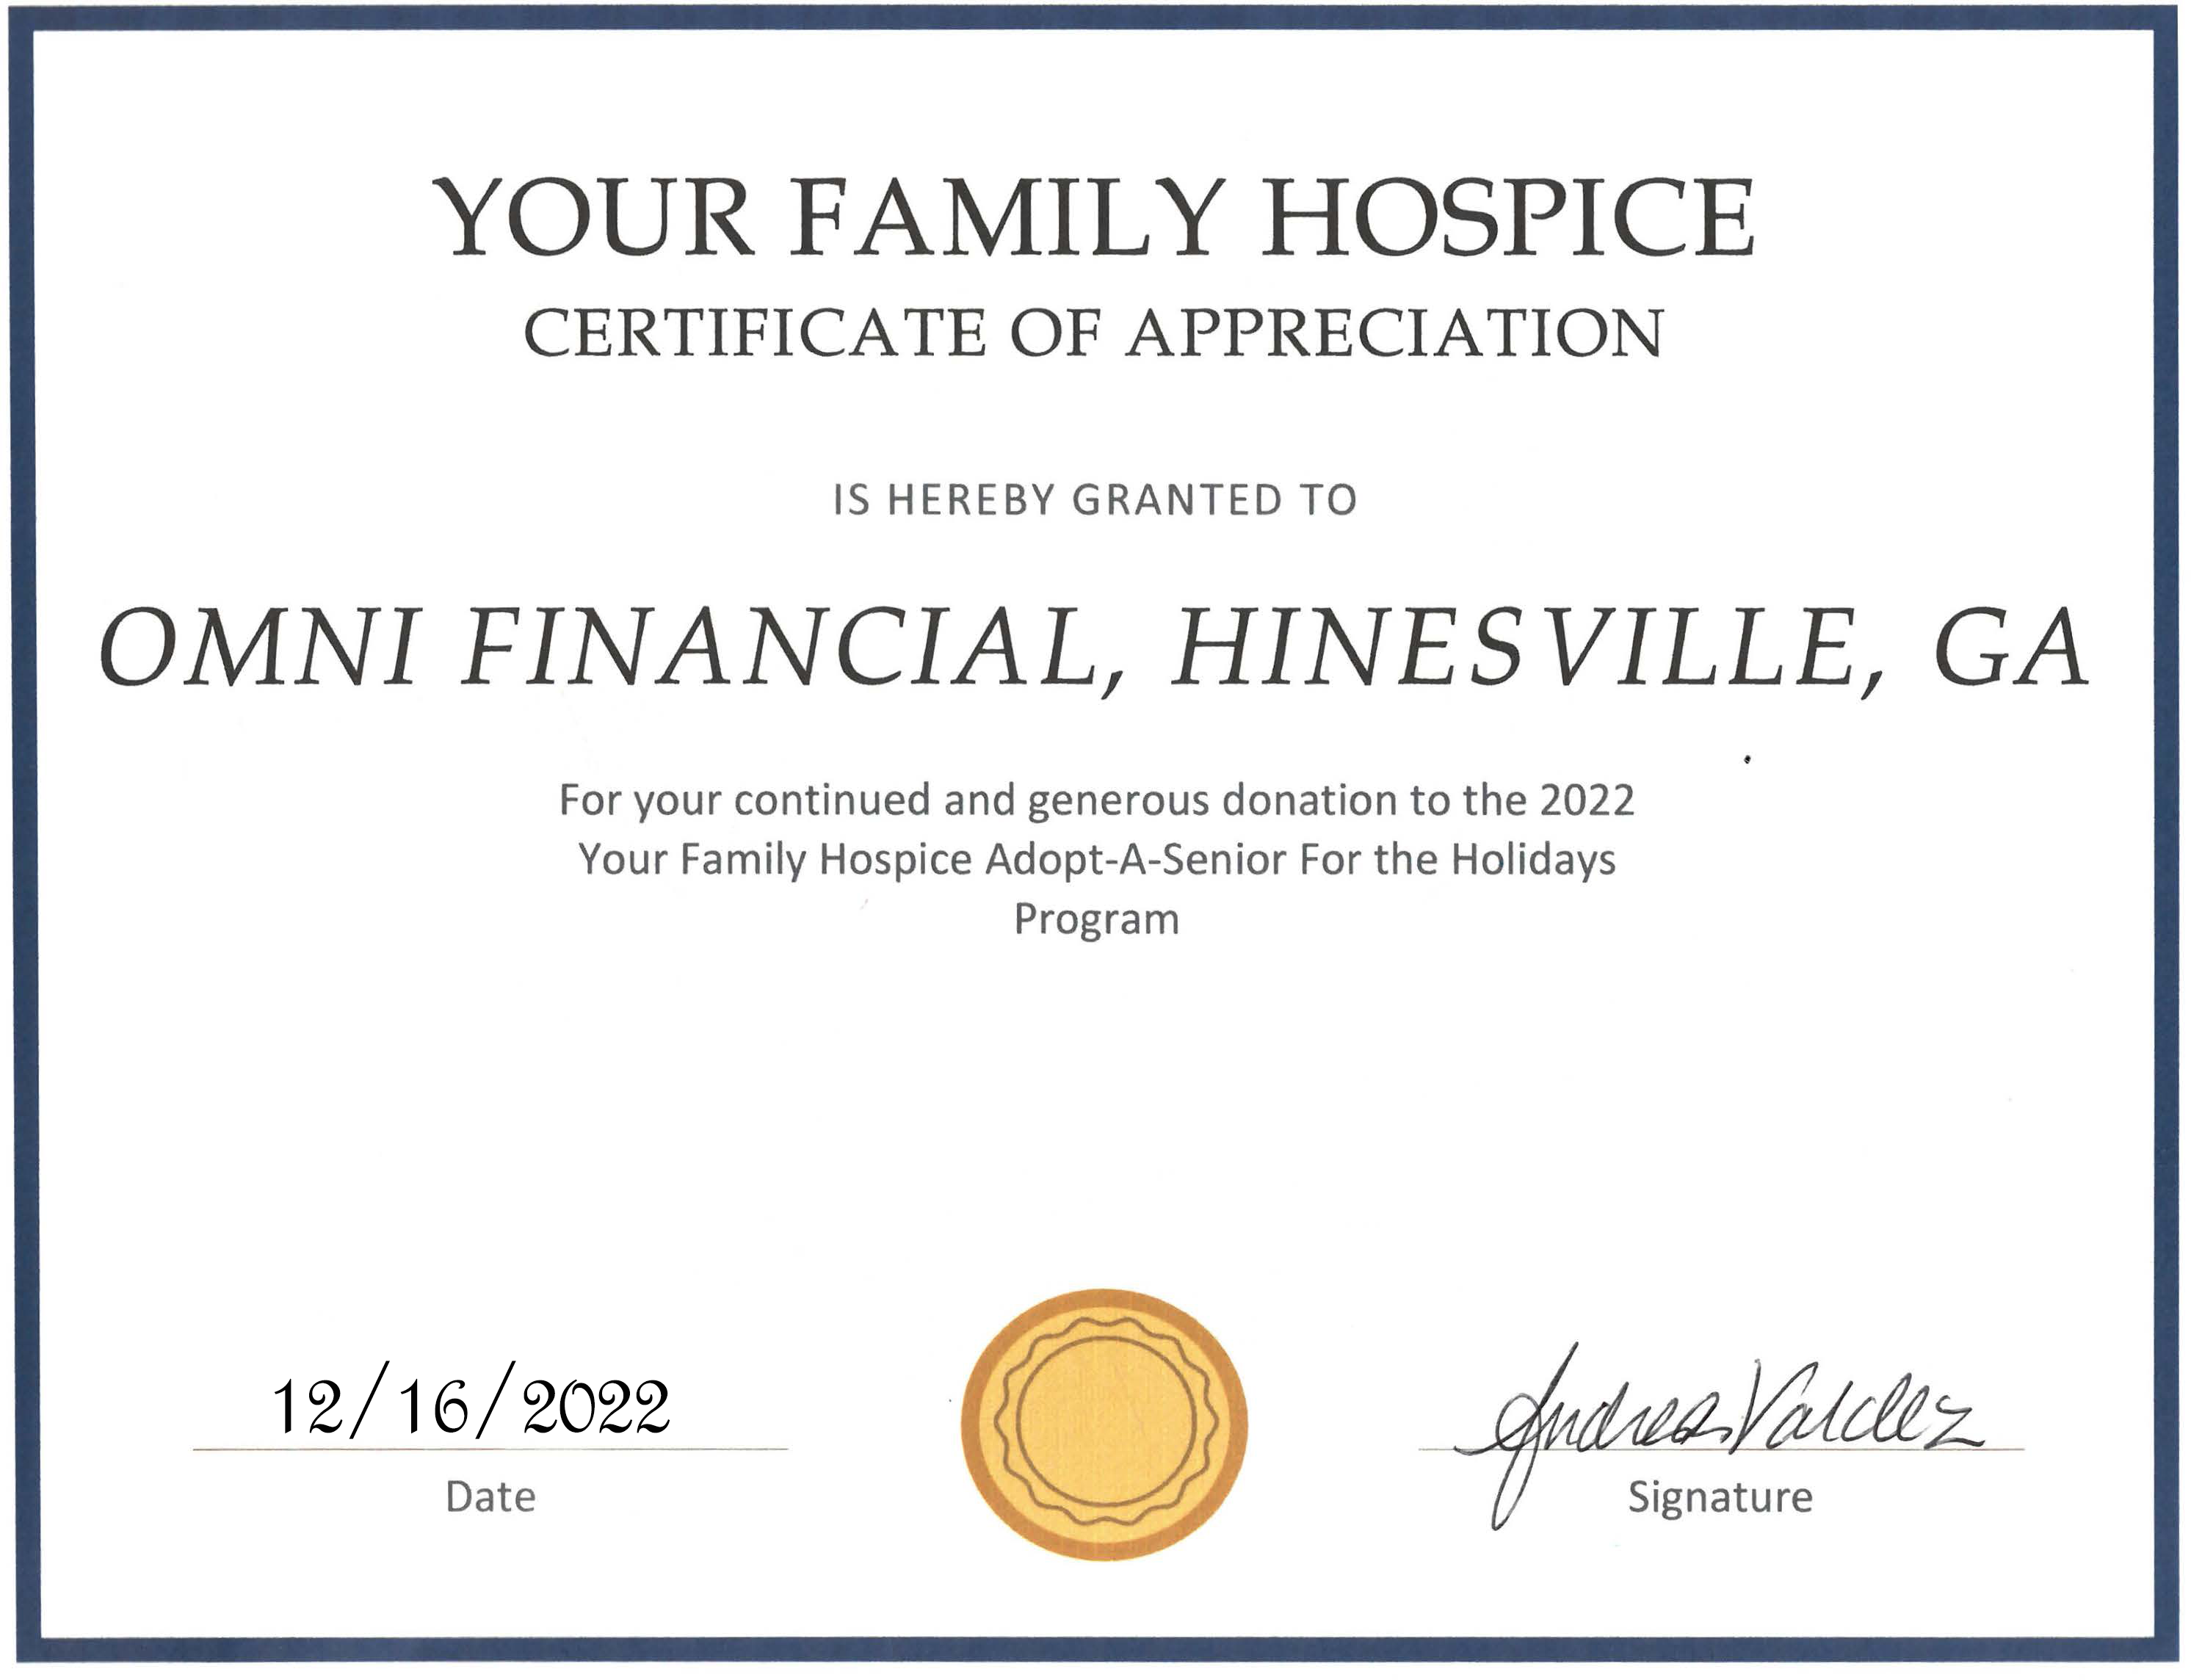 Your Family Hospice Certificate of Appreciation